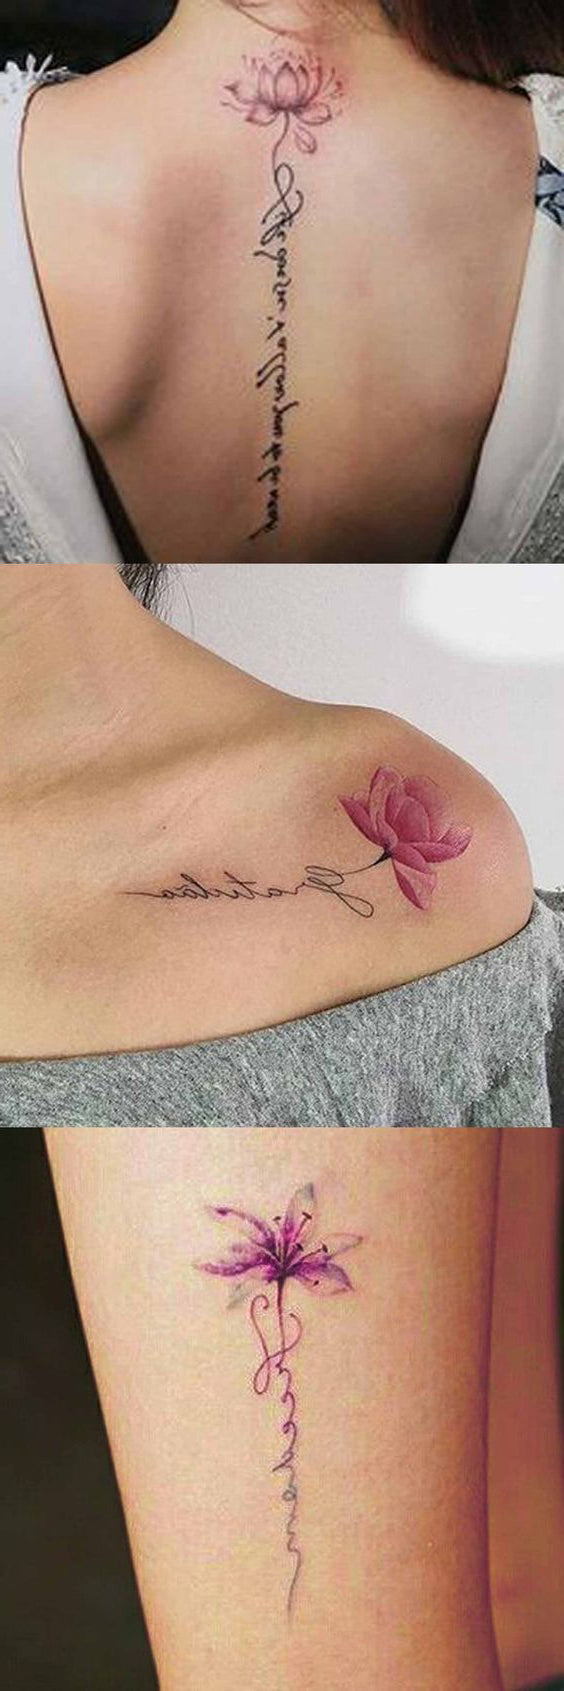 17 Spine Tattoo Designs That Will Chill You To The Bone - Cultura Colectiva  | Back tattoo women, Spine tattoo, Spine tattoos